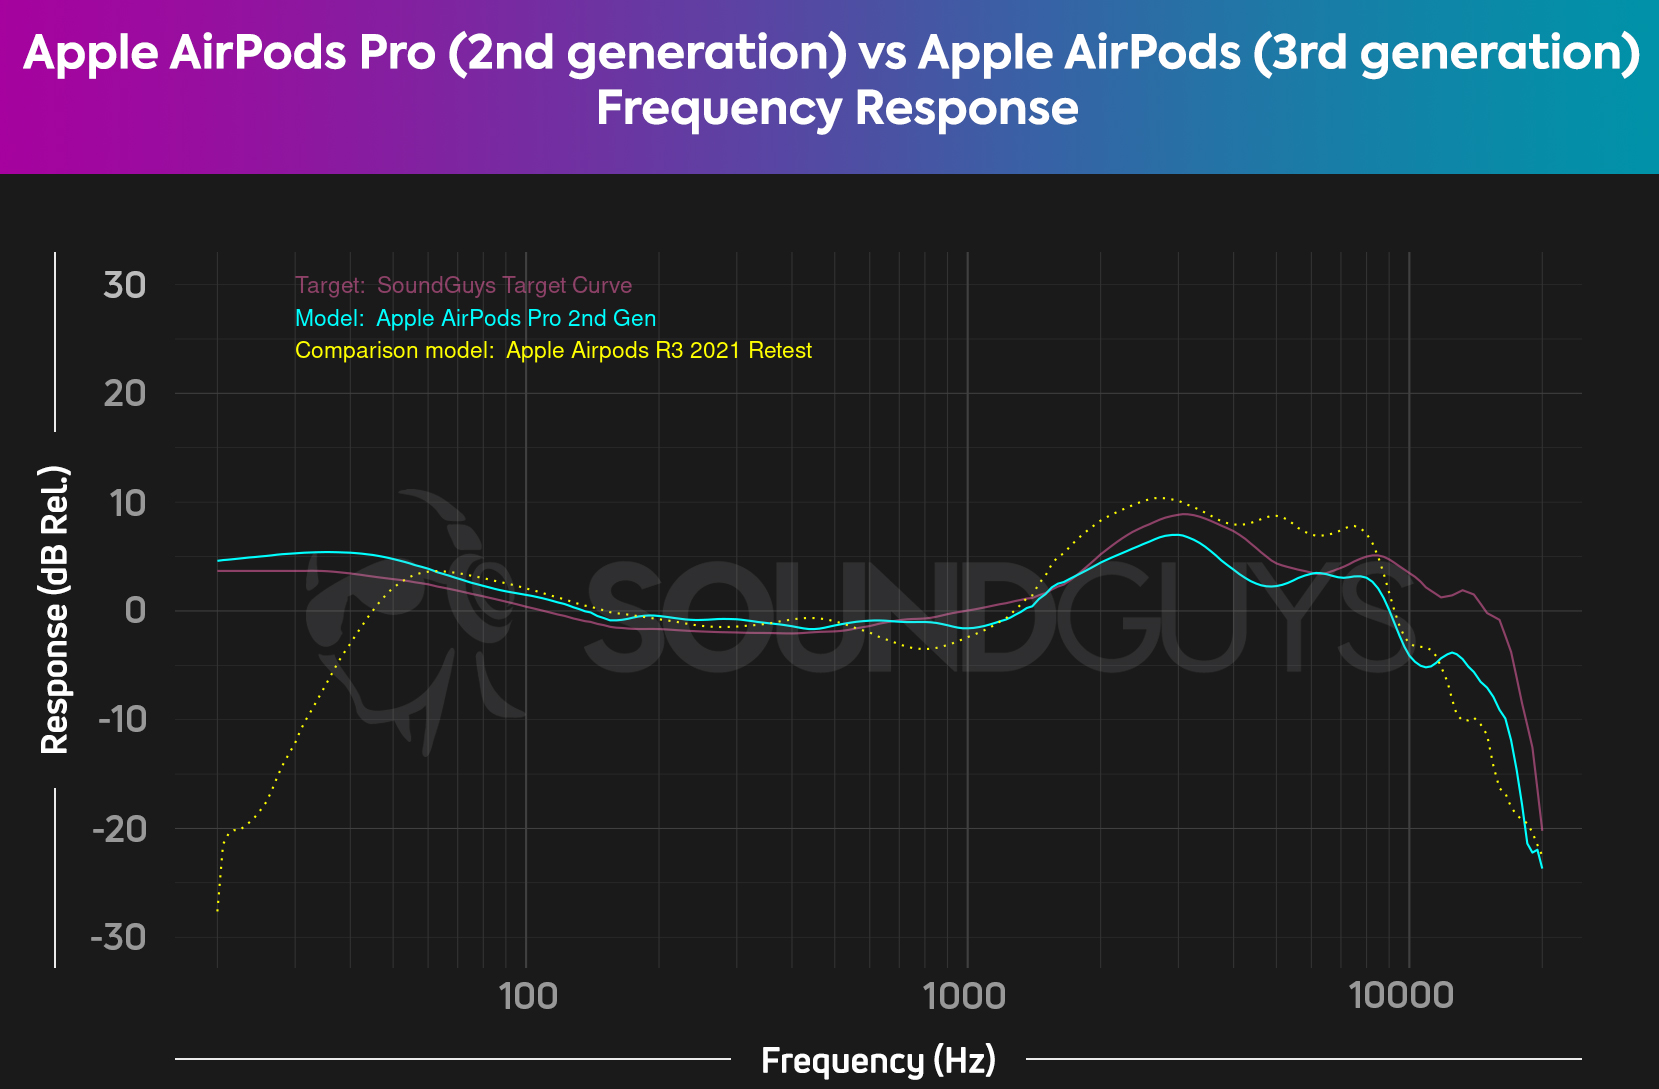 Chart comparing Apple AirPods Pro 2nd Gen and AirPods 3rd gen frequency response